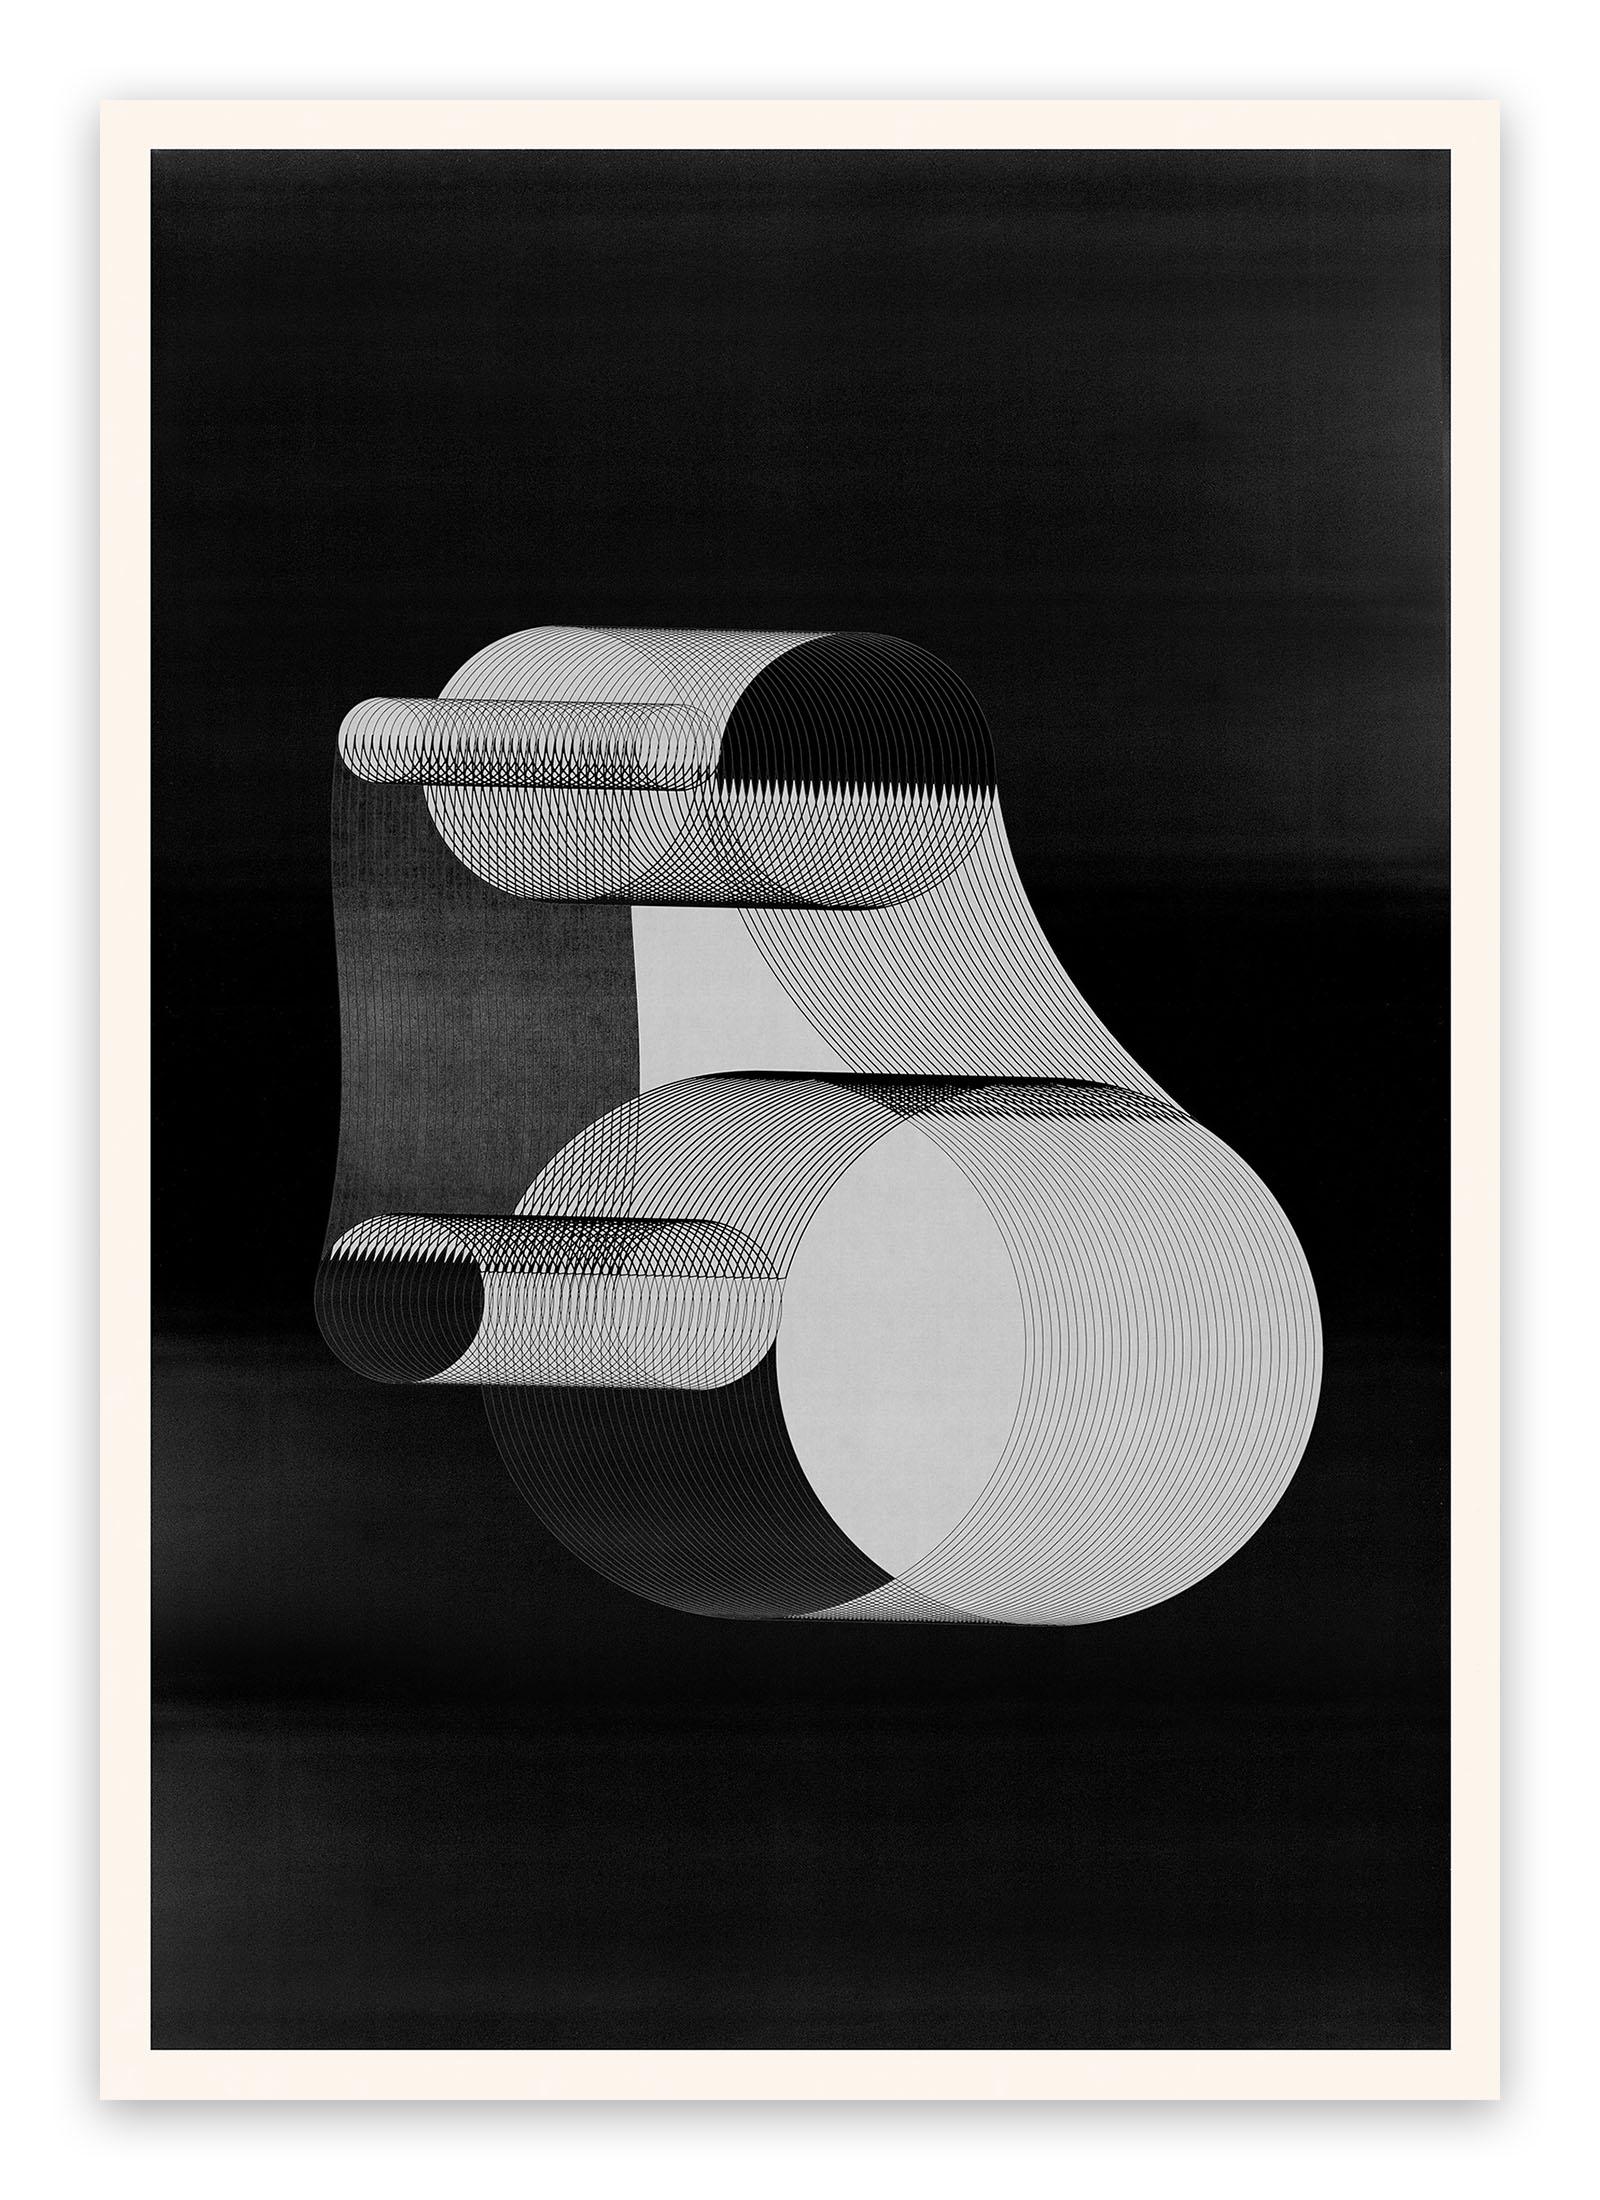 M353 (Abstract Print)

Digital creation, printed on Hahnemühle Photo Rag de 308 gr - Unframed.

Fluctuating between illustration and expressionism, connecting the geometric and biomorphic worlds, Perea communicates the subtle mathematical beauty of